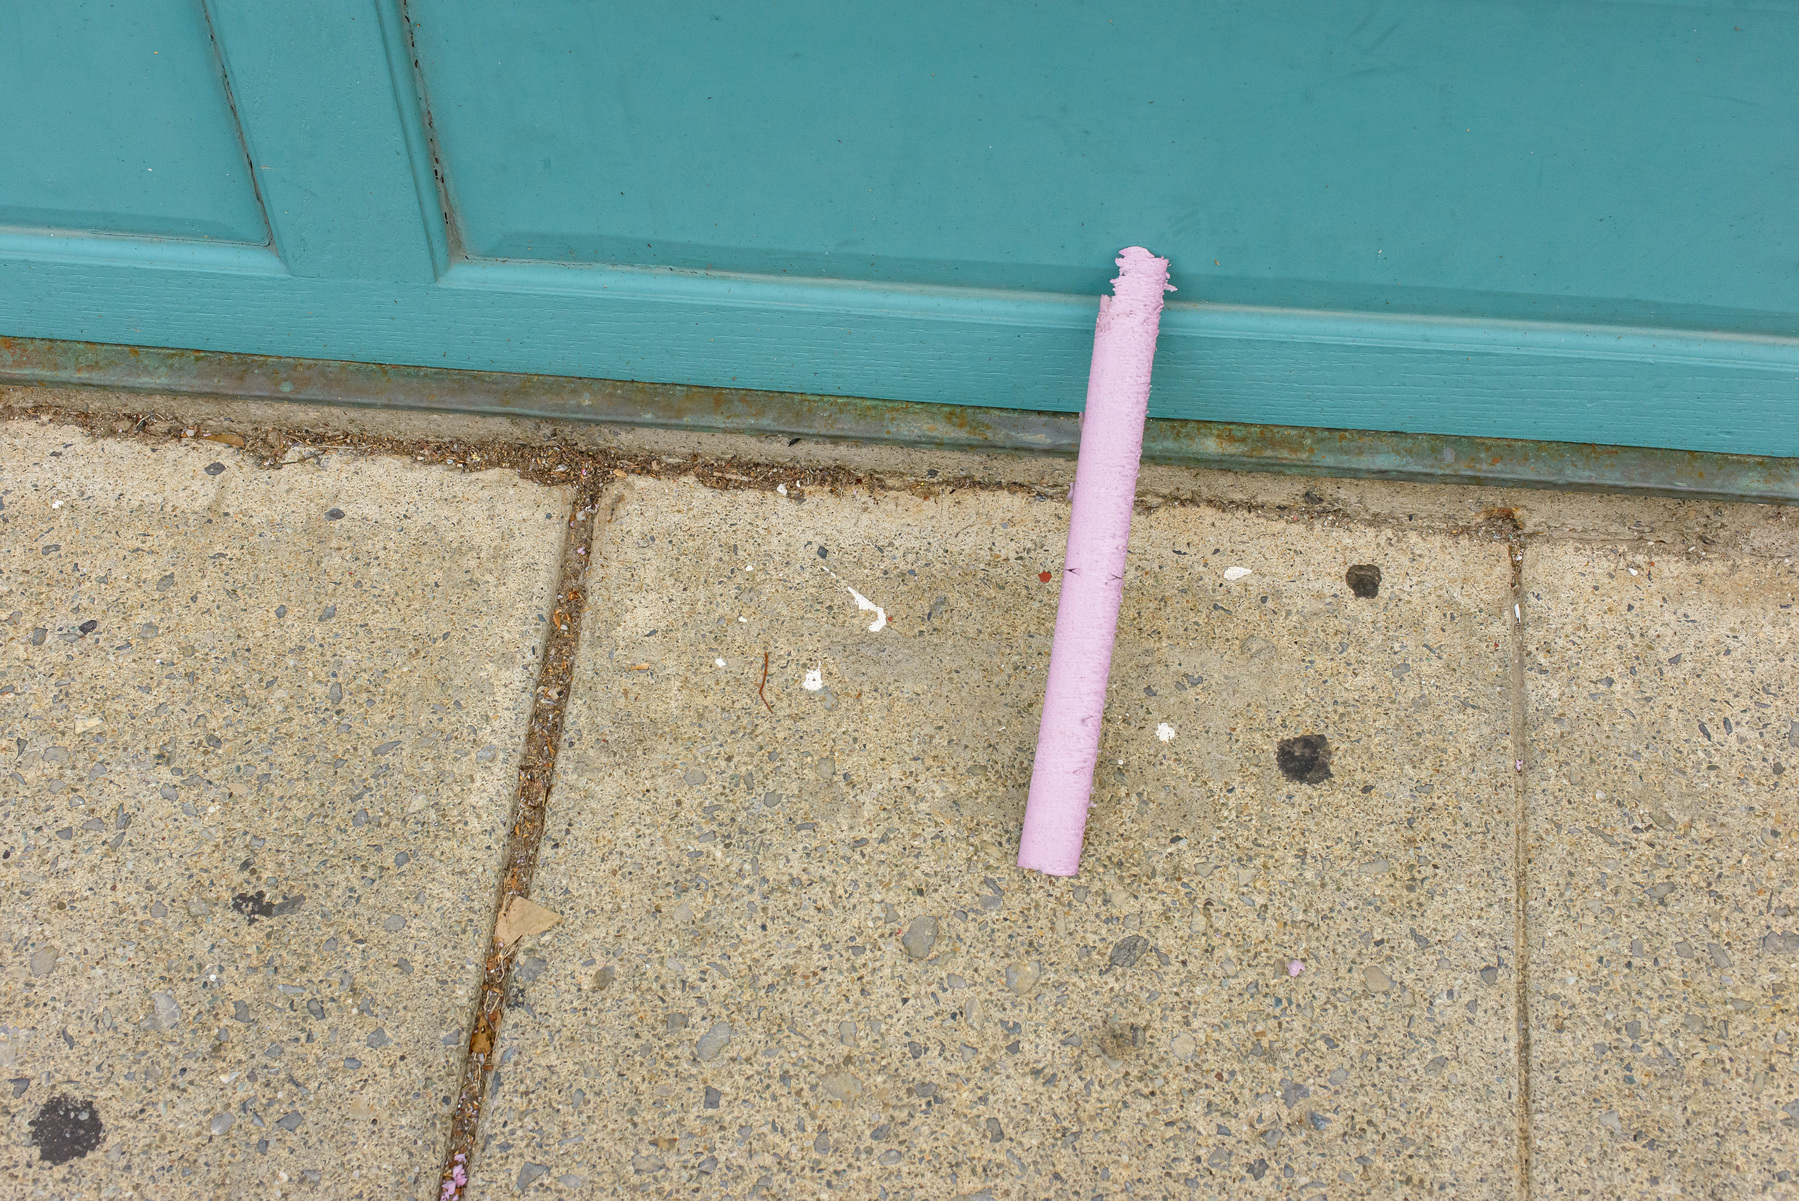 piece of pink tubular debris leaning against a blue/gray wall and the concrete sidewalk